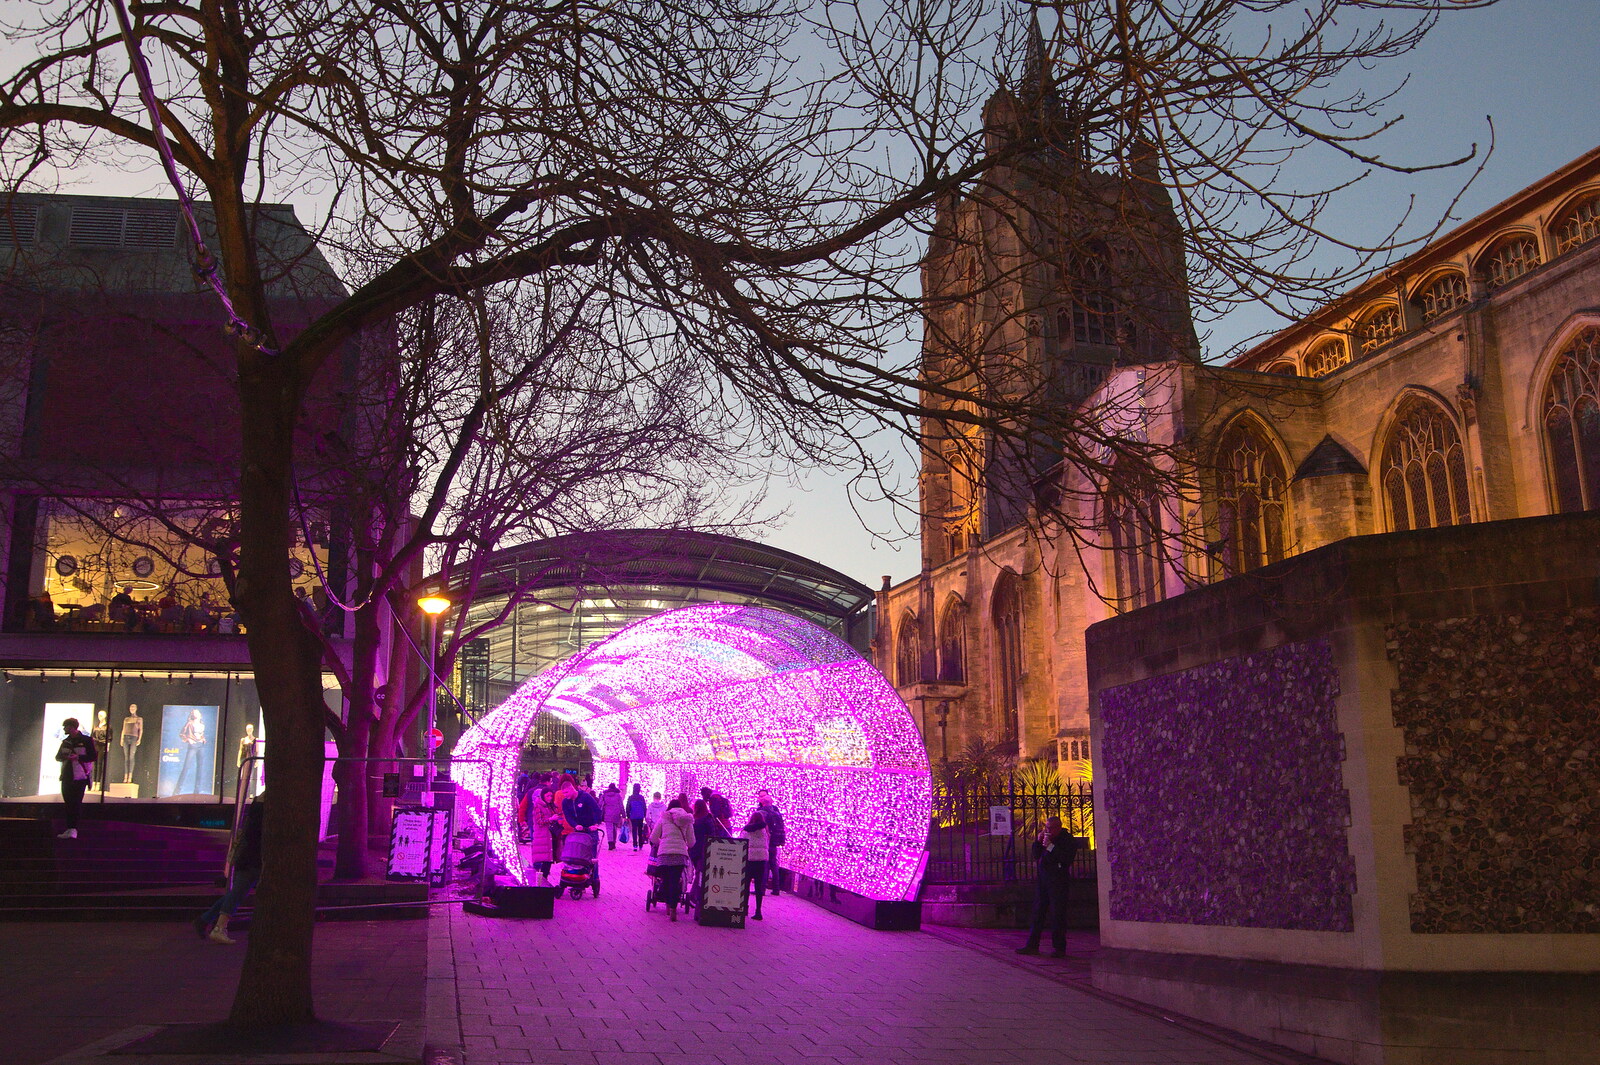 The light tunnel by St. Peter Mancroft from Christmas Shopping in Norwich, Norfolk - 21st December 2022